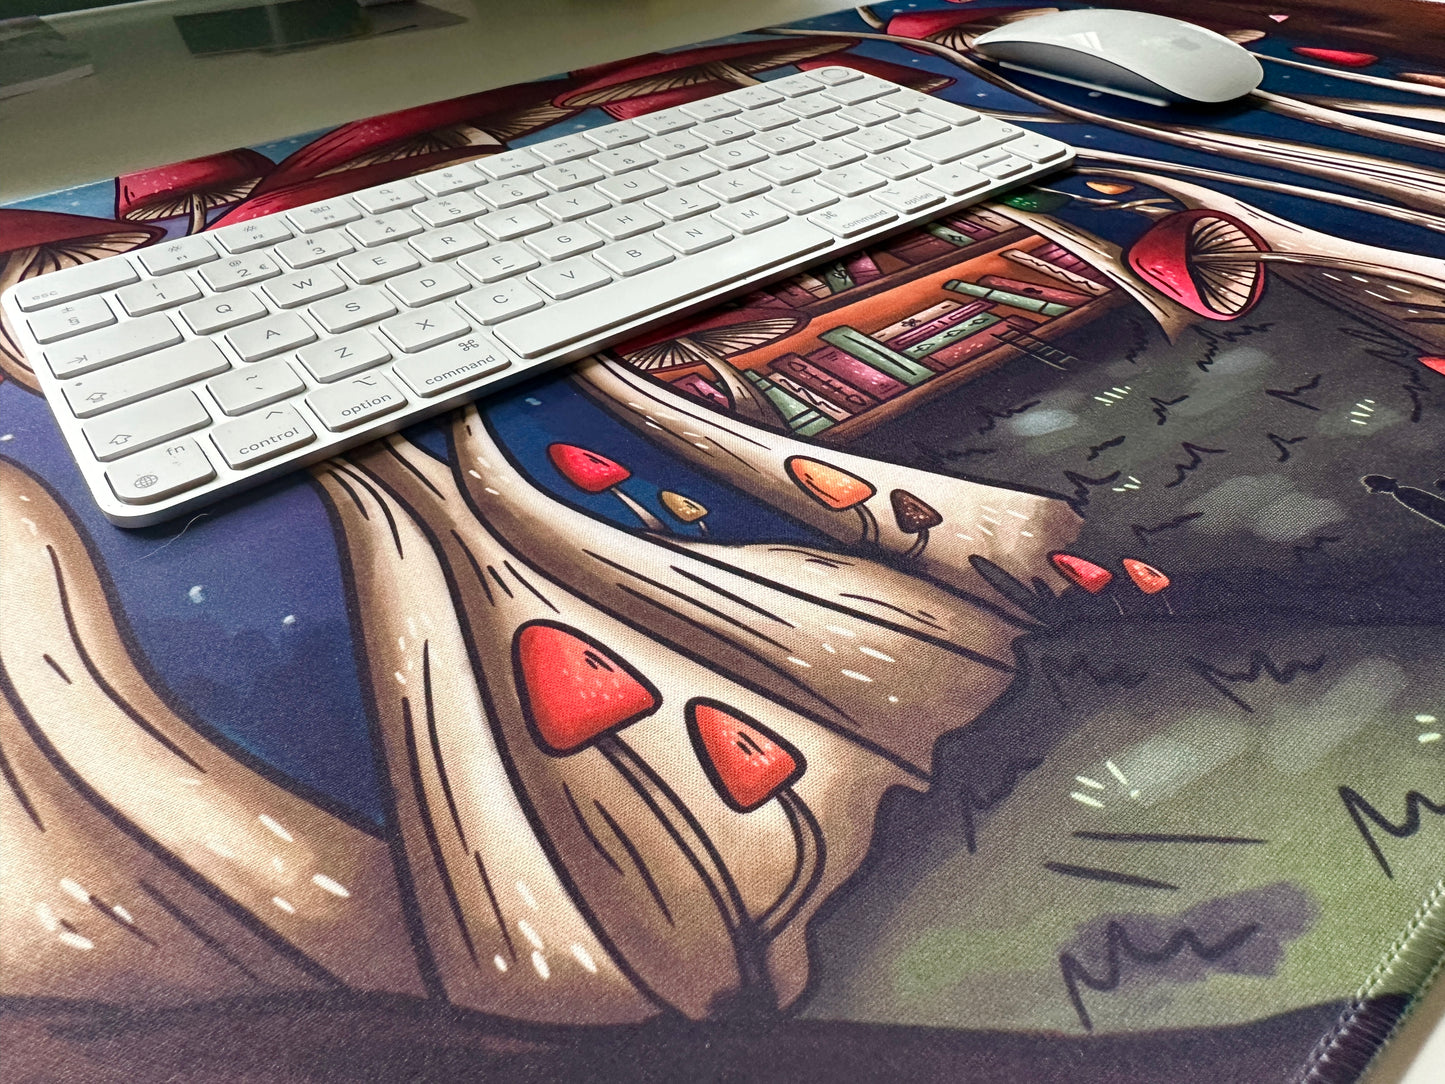 "Where the banned books go" Desk Mat / Gaming Mousepad